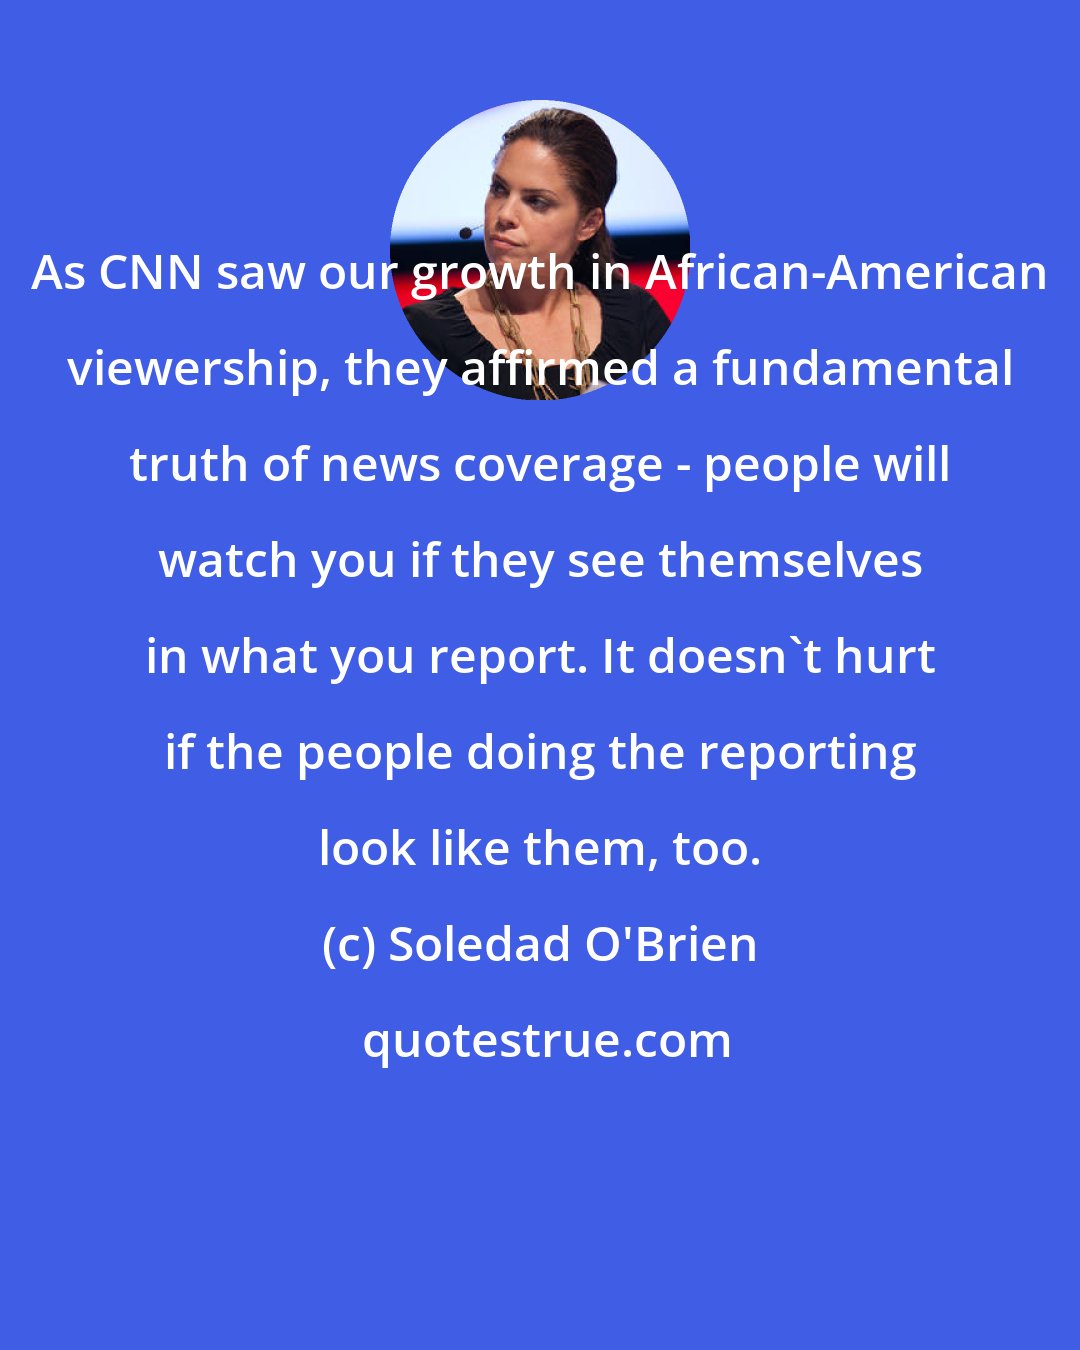 Soledad O'Brien: As CNN saw our growth in African-American viewership, they affirmed a fundamental truth of news coverage - people will watch you if they see themselves in what you report. It doesn't hurt if the people doing the reporting look like them, too.